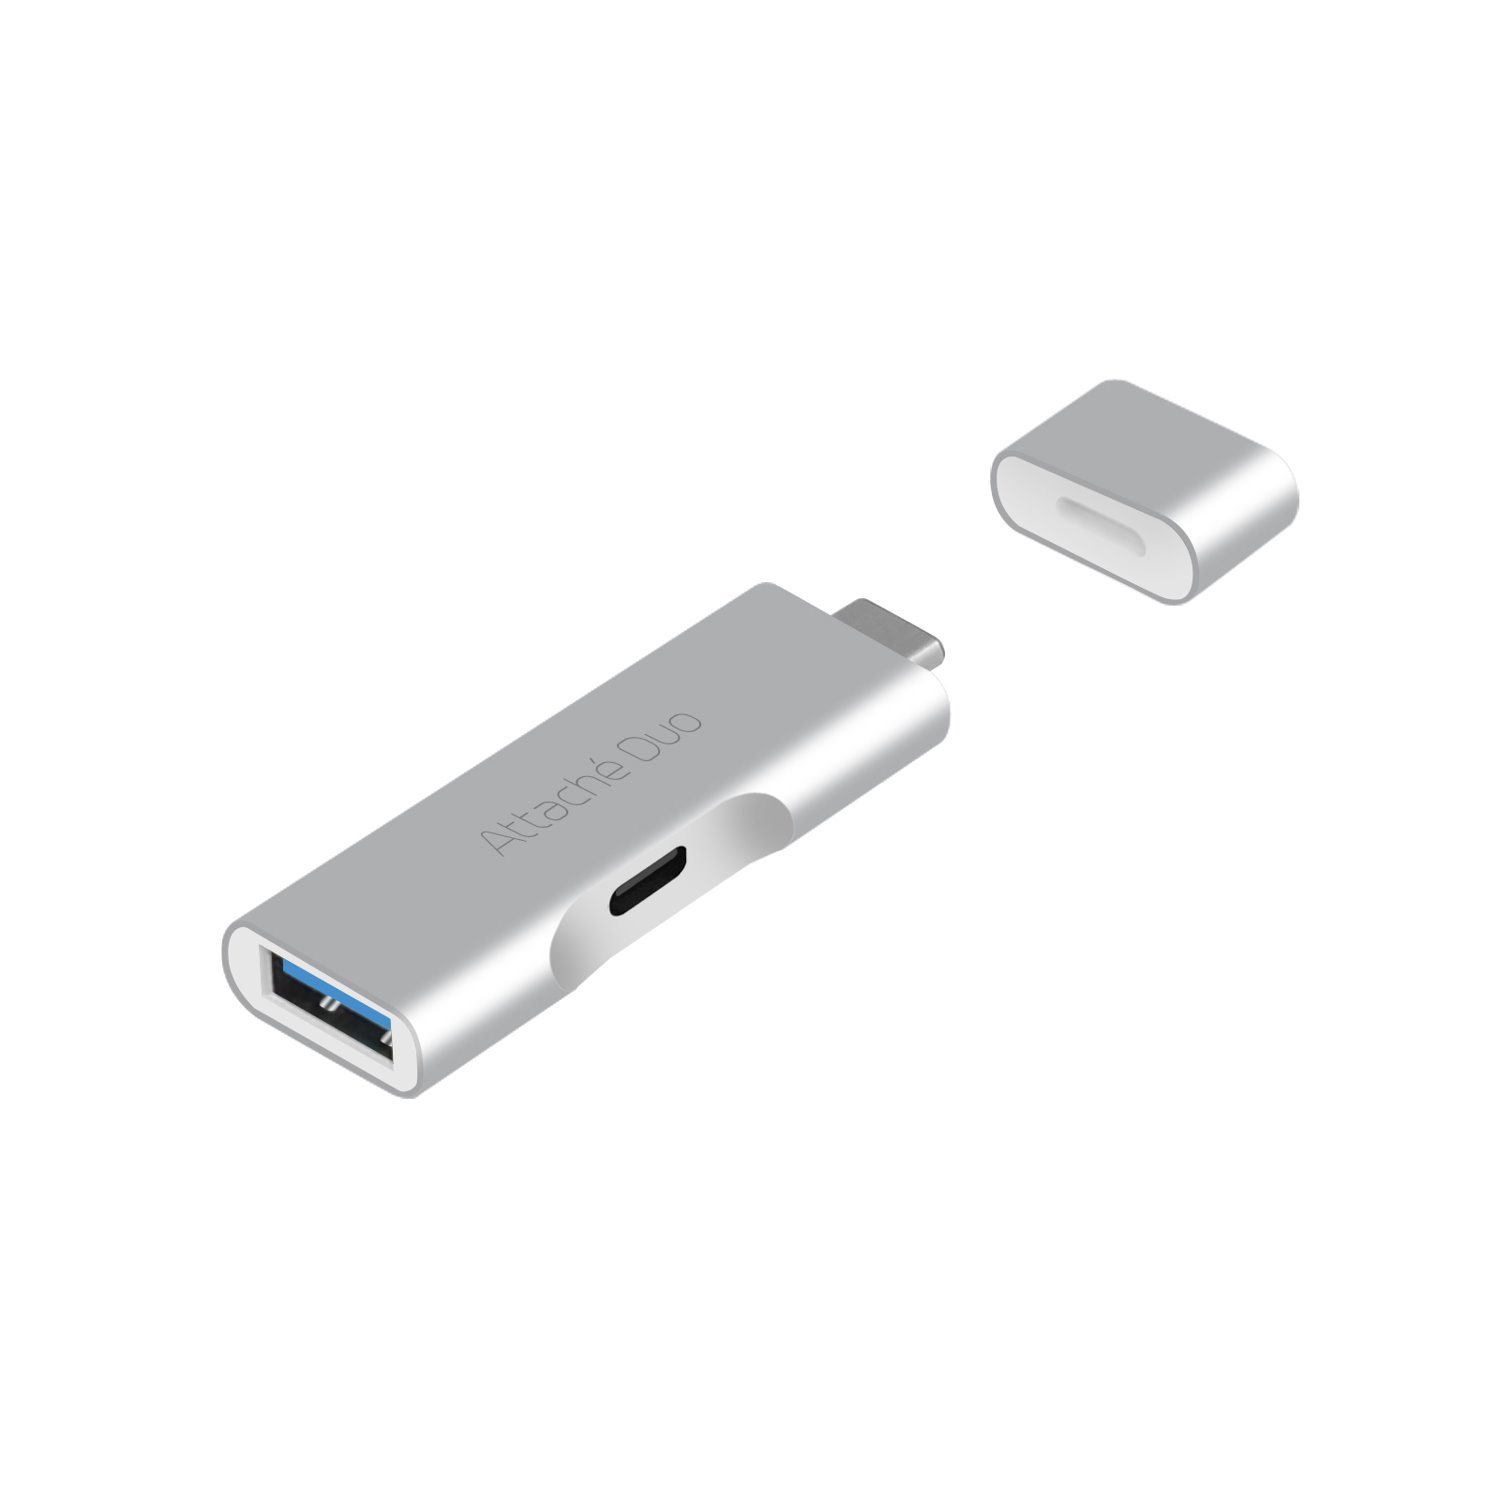 Mbeat® Attach Duo Type-C To Usb 3.1 Adapter With Type-C Usb-C Port -Support Usb 3.1/3.0/2.0/1.1 Devices (LS)